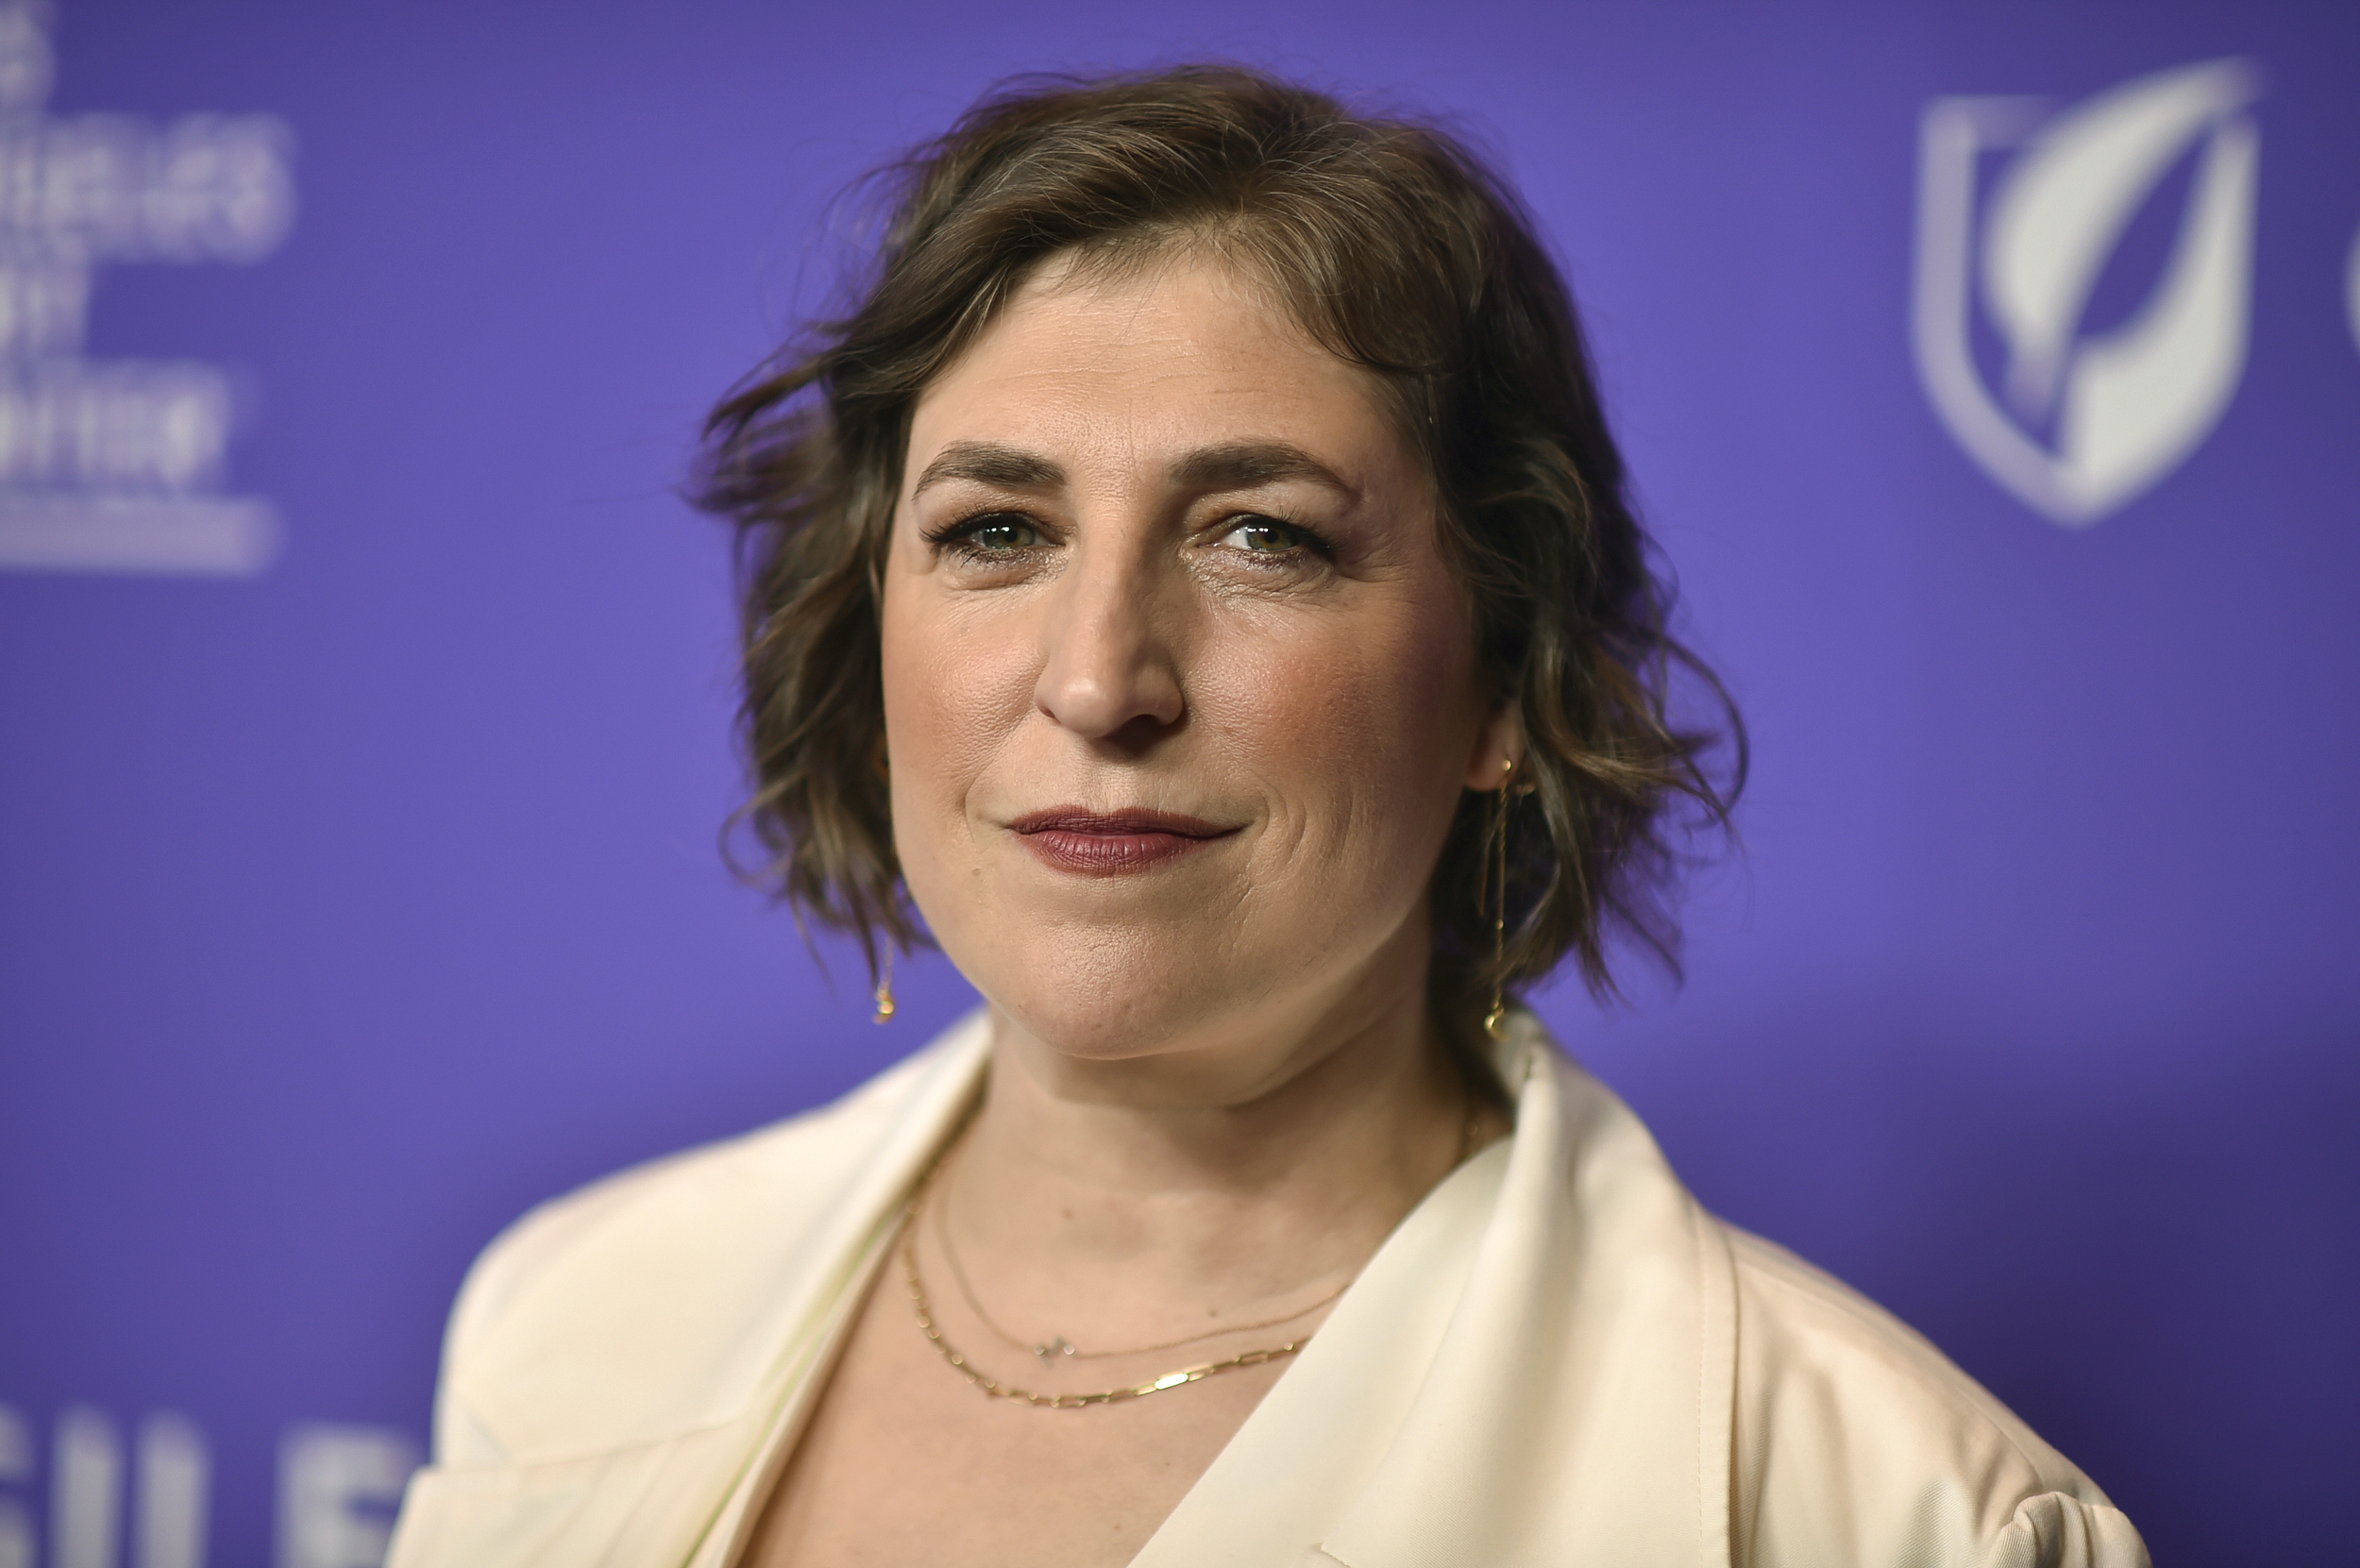 Mayim Bialik was fired from Jeopardy! after being named co-host in 2022